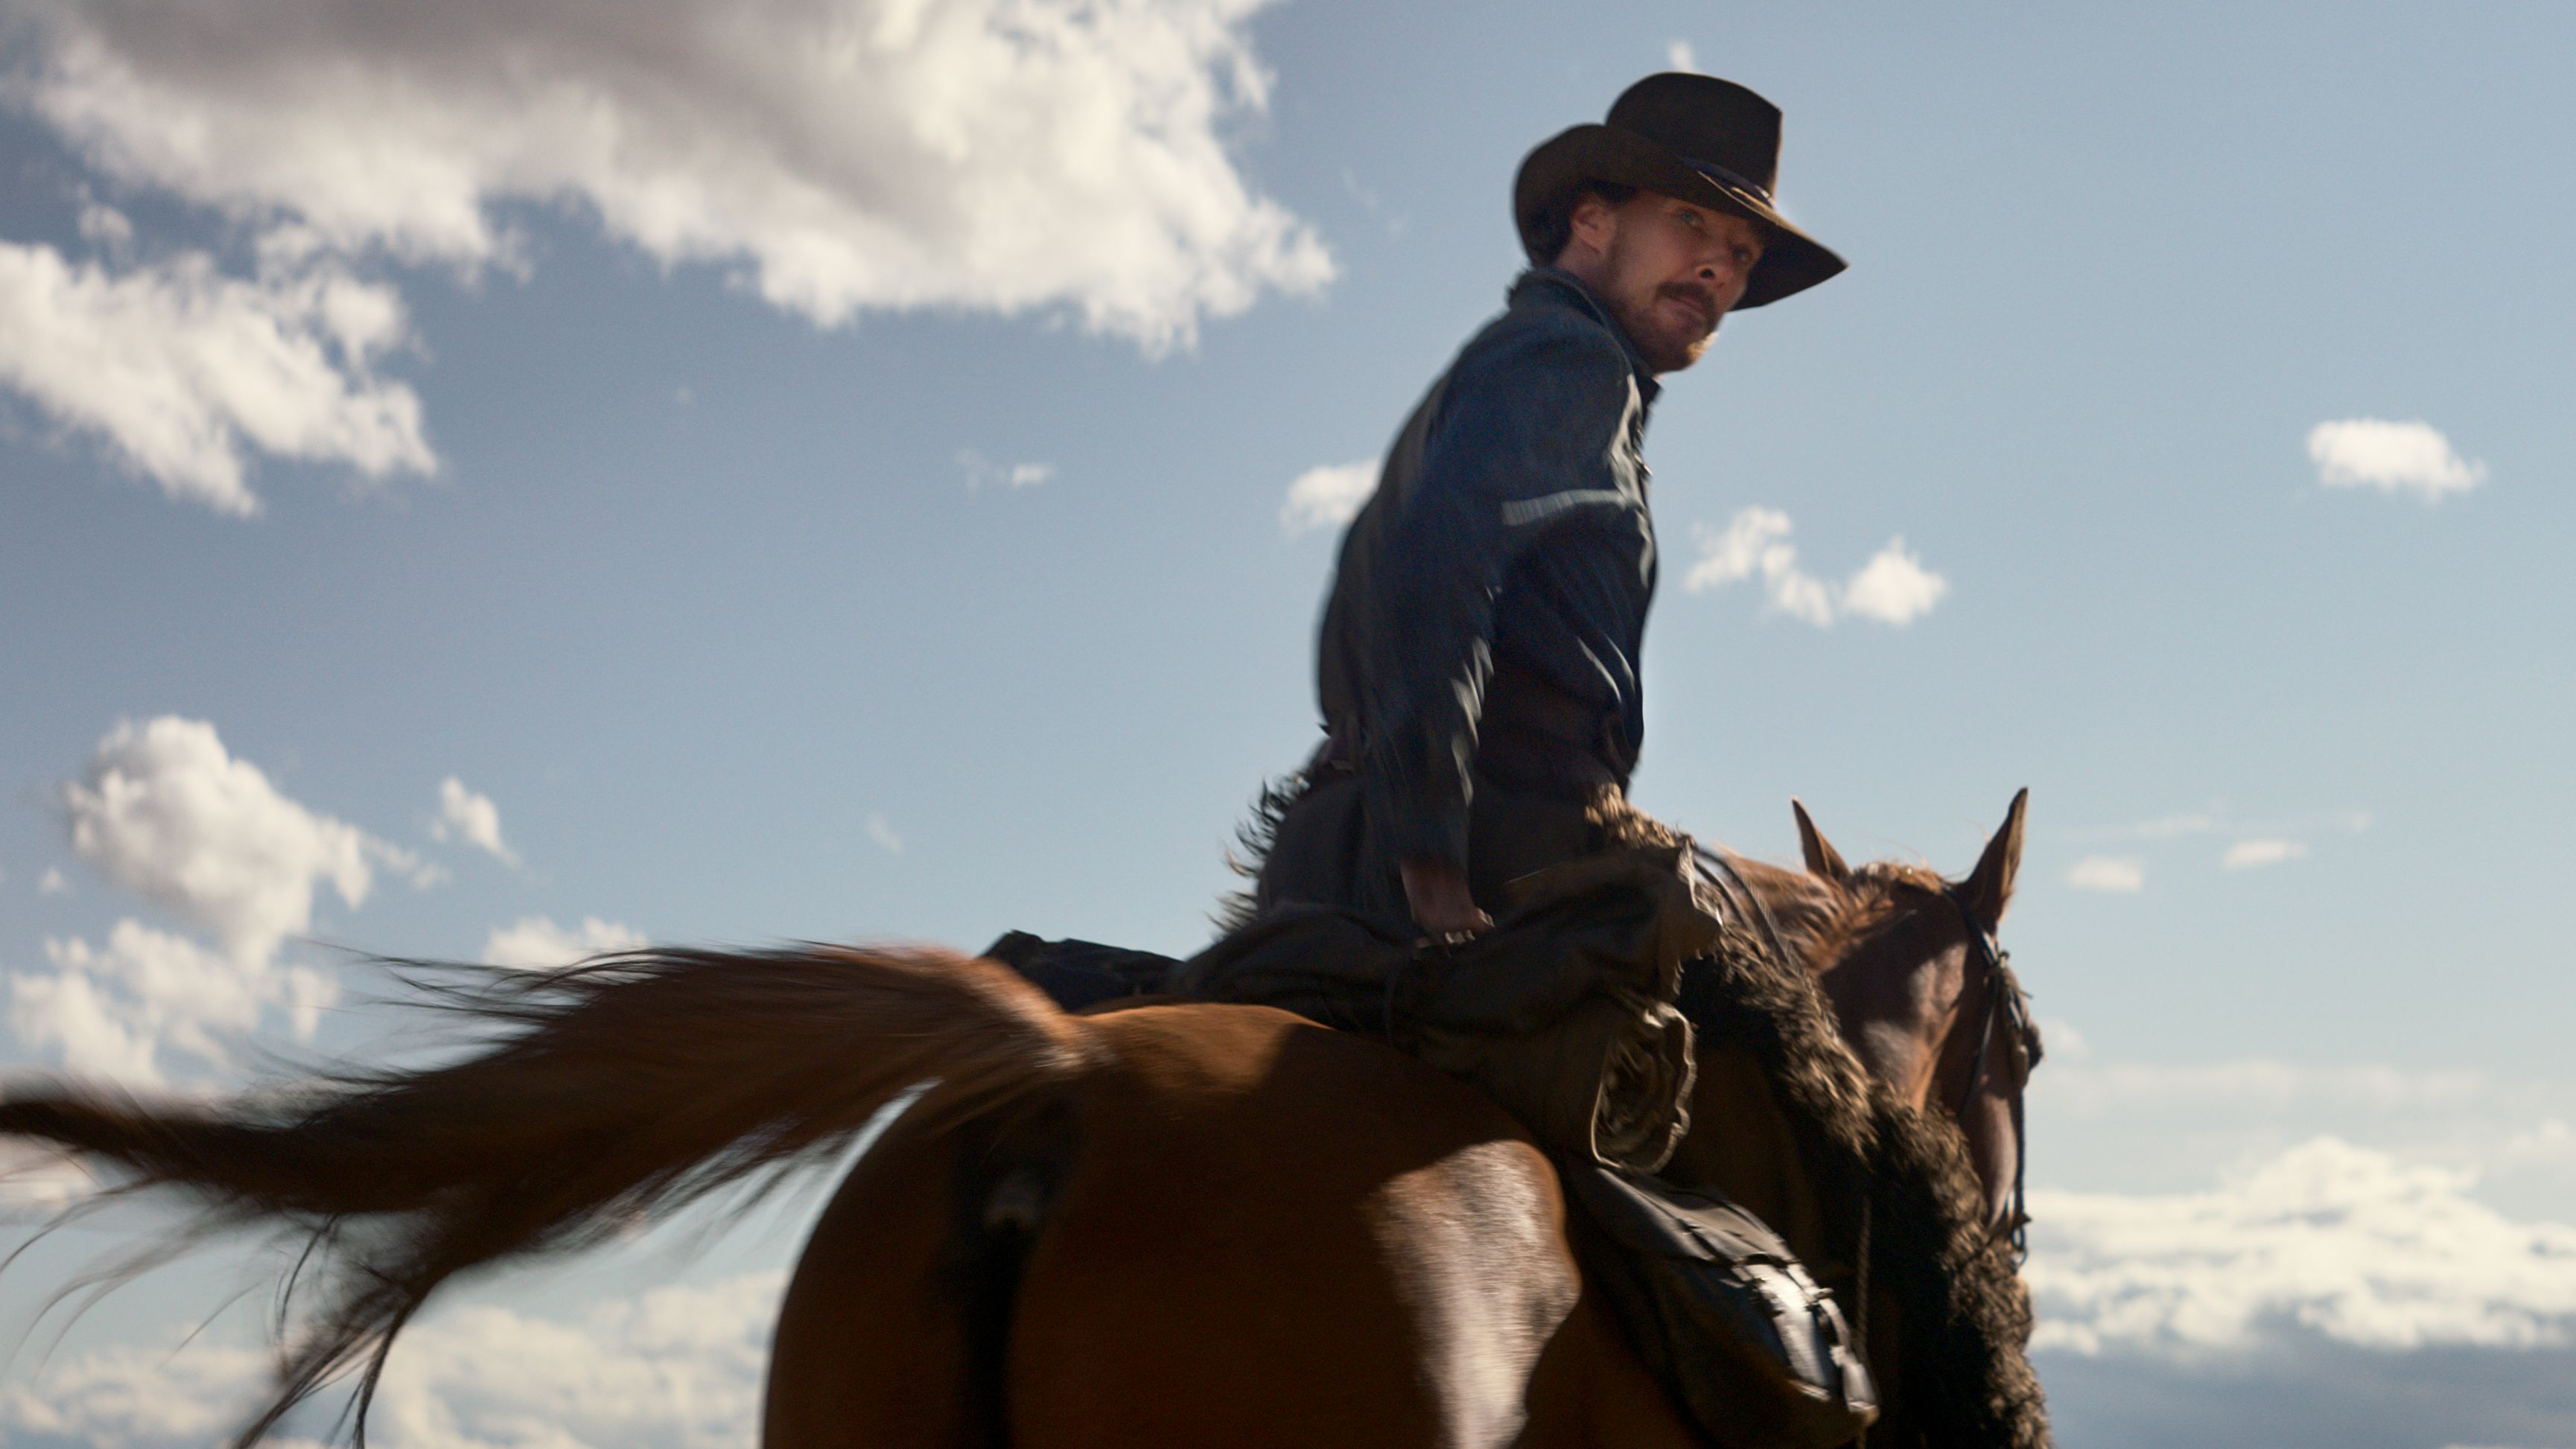 Benedict Cumberbatch as rancher Phil Burbank in "The Power of the Dog."